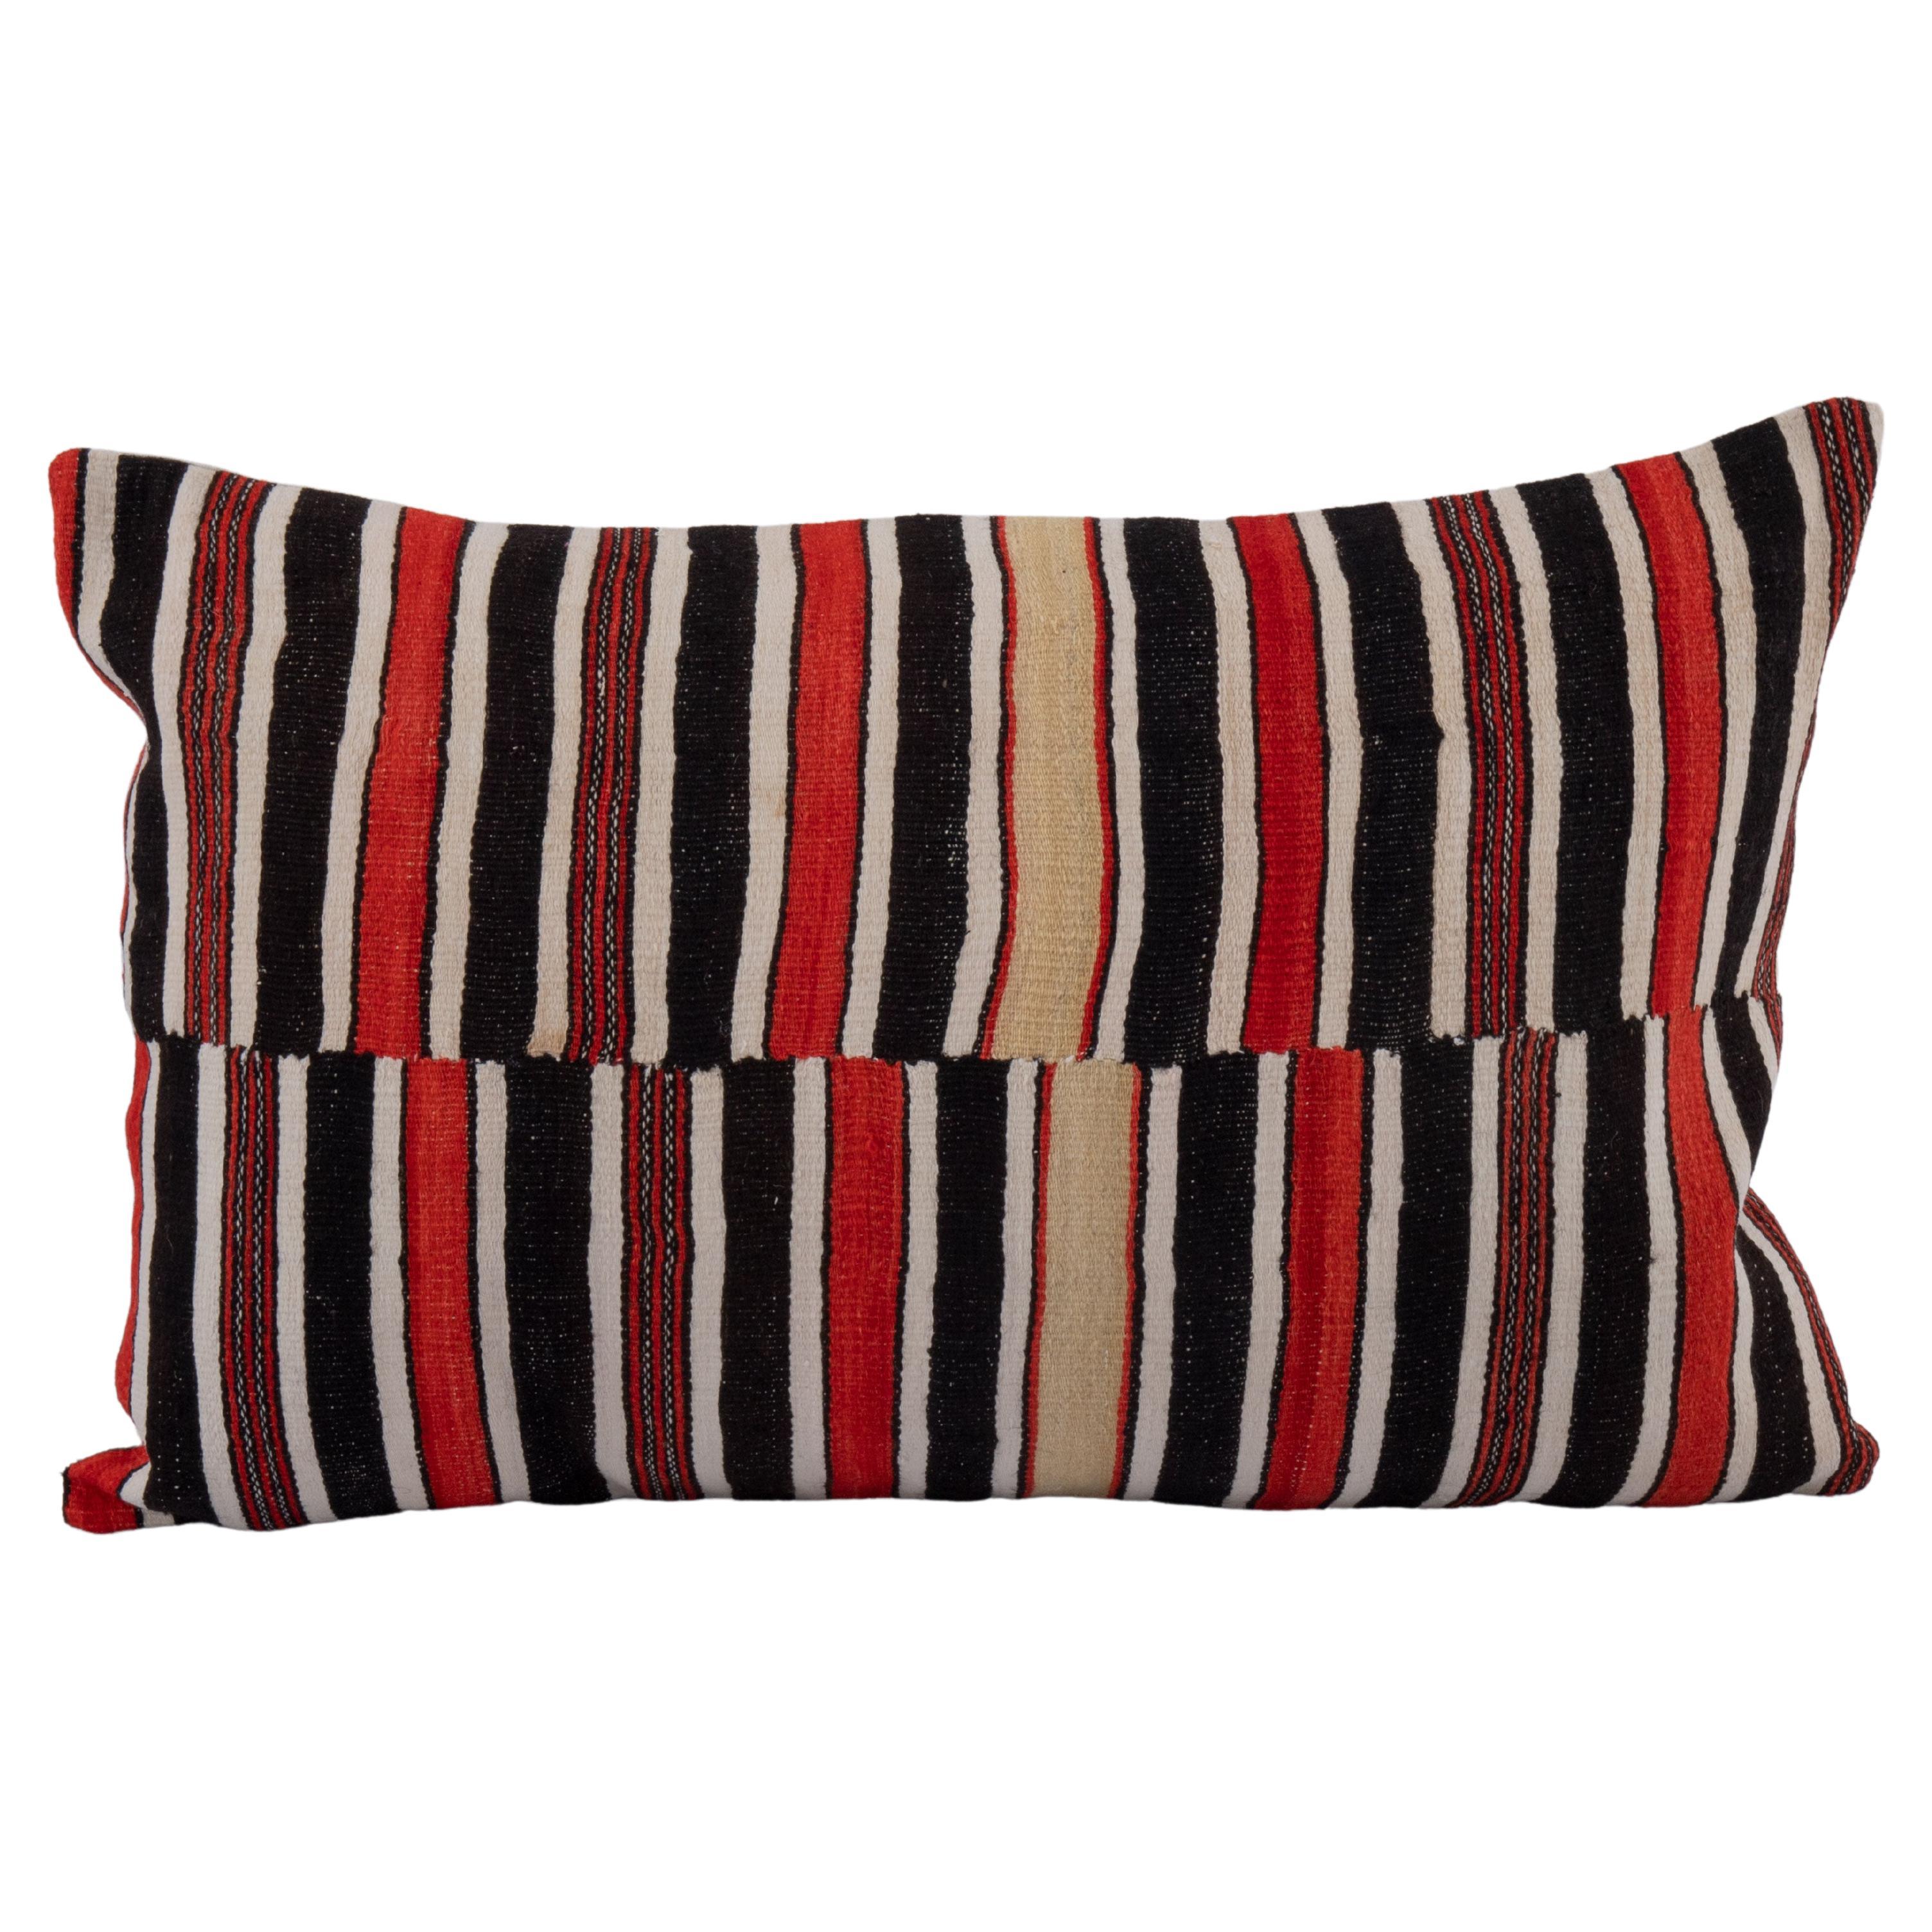 Pillow Cover Made from a Vintage West African Fulani Blanket